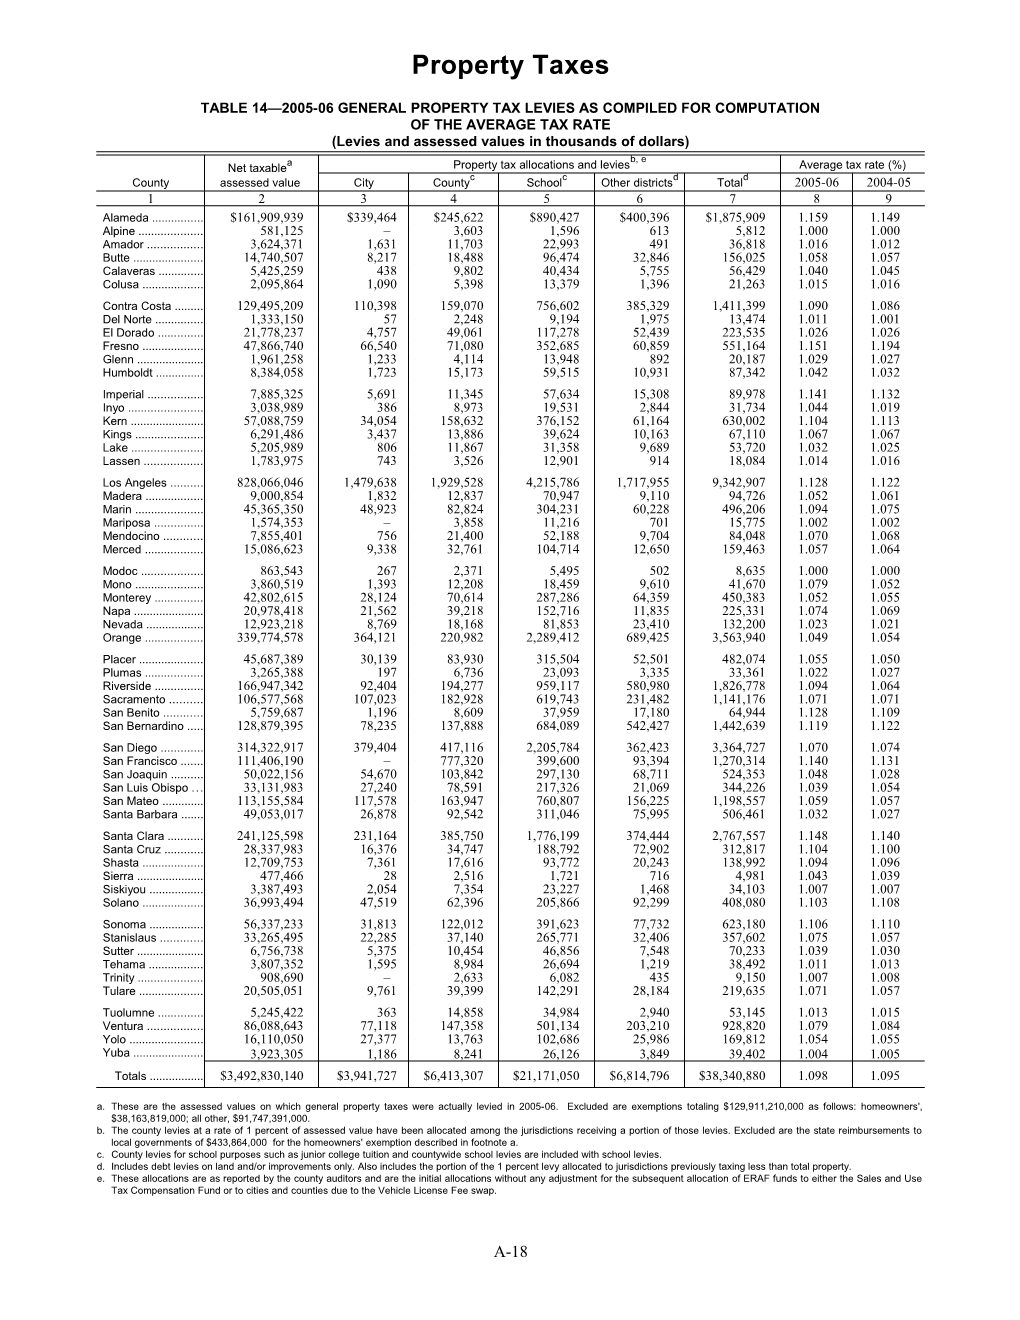 Table 14 2005-06 General Property Tax Levies As Compiled for Computation